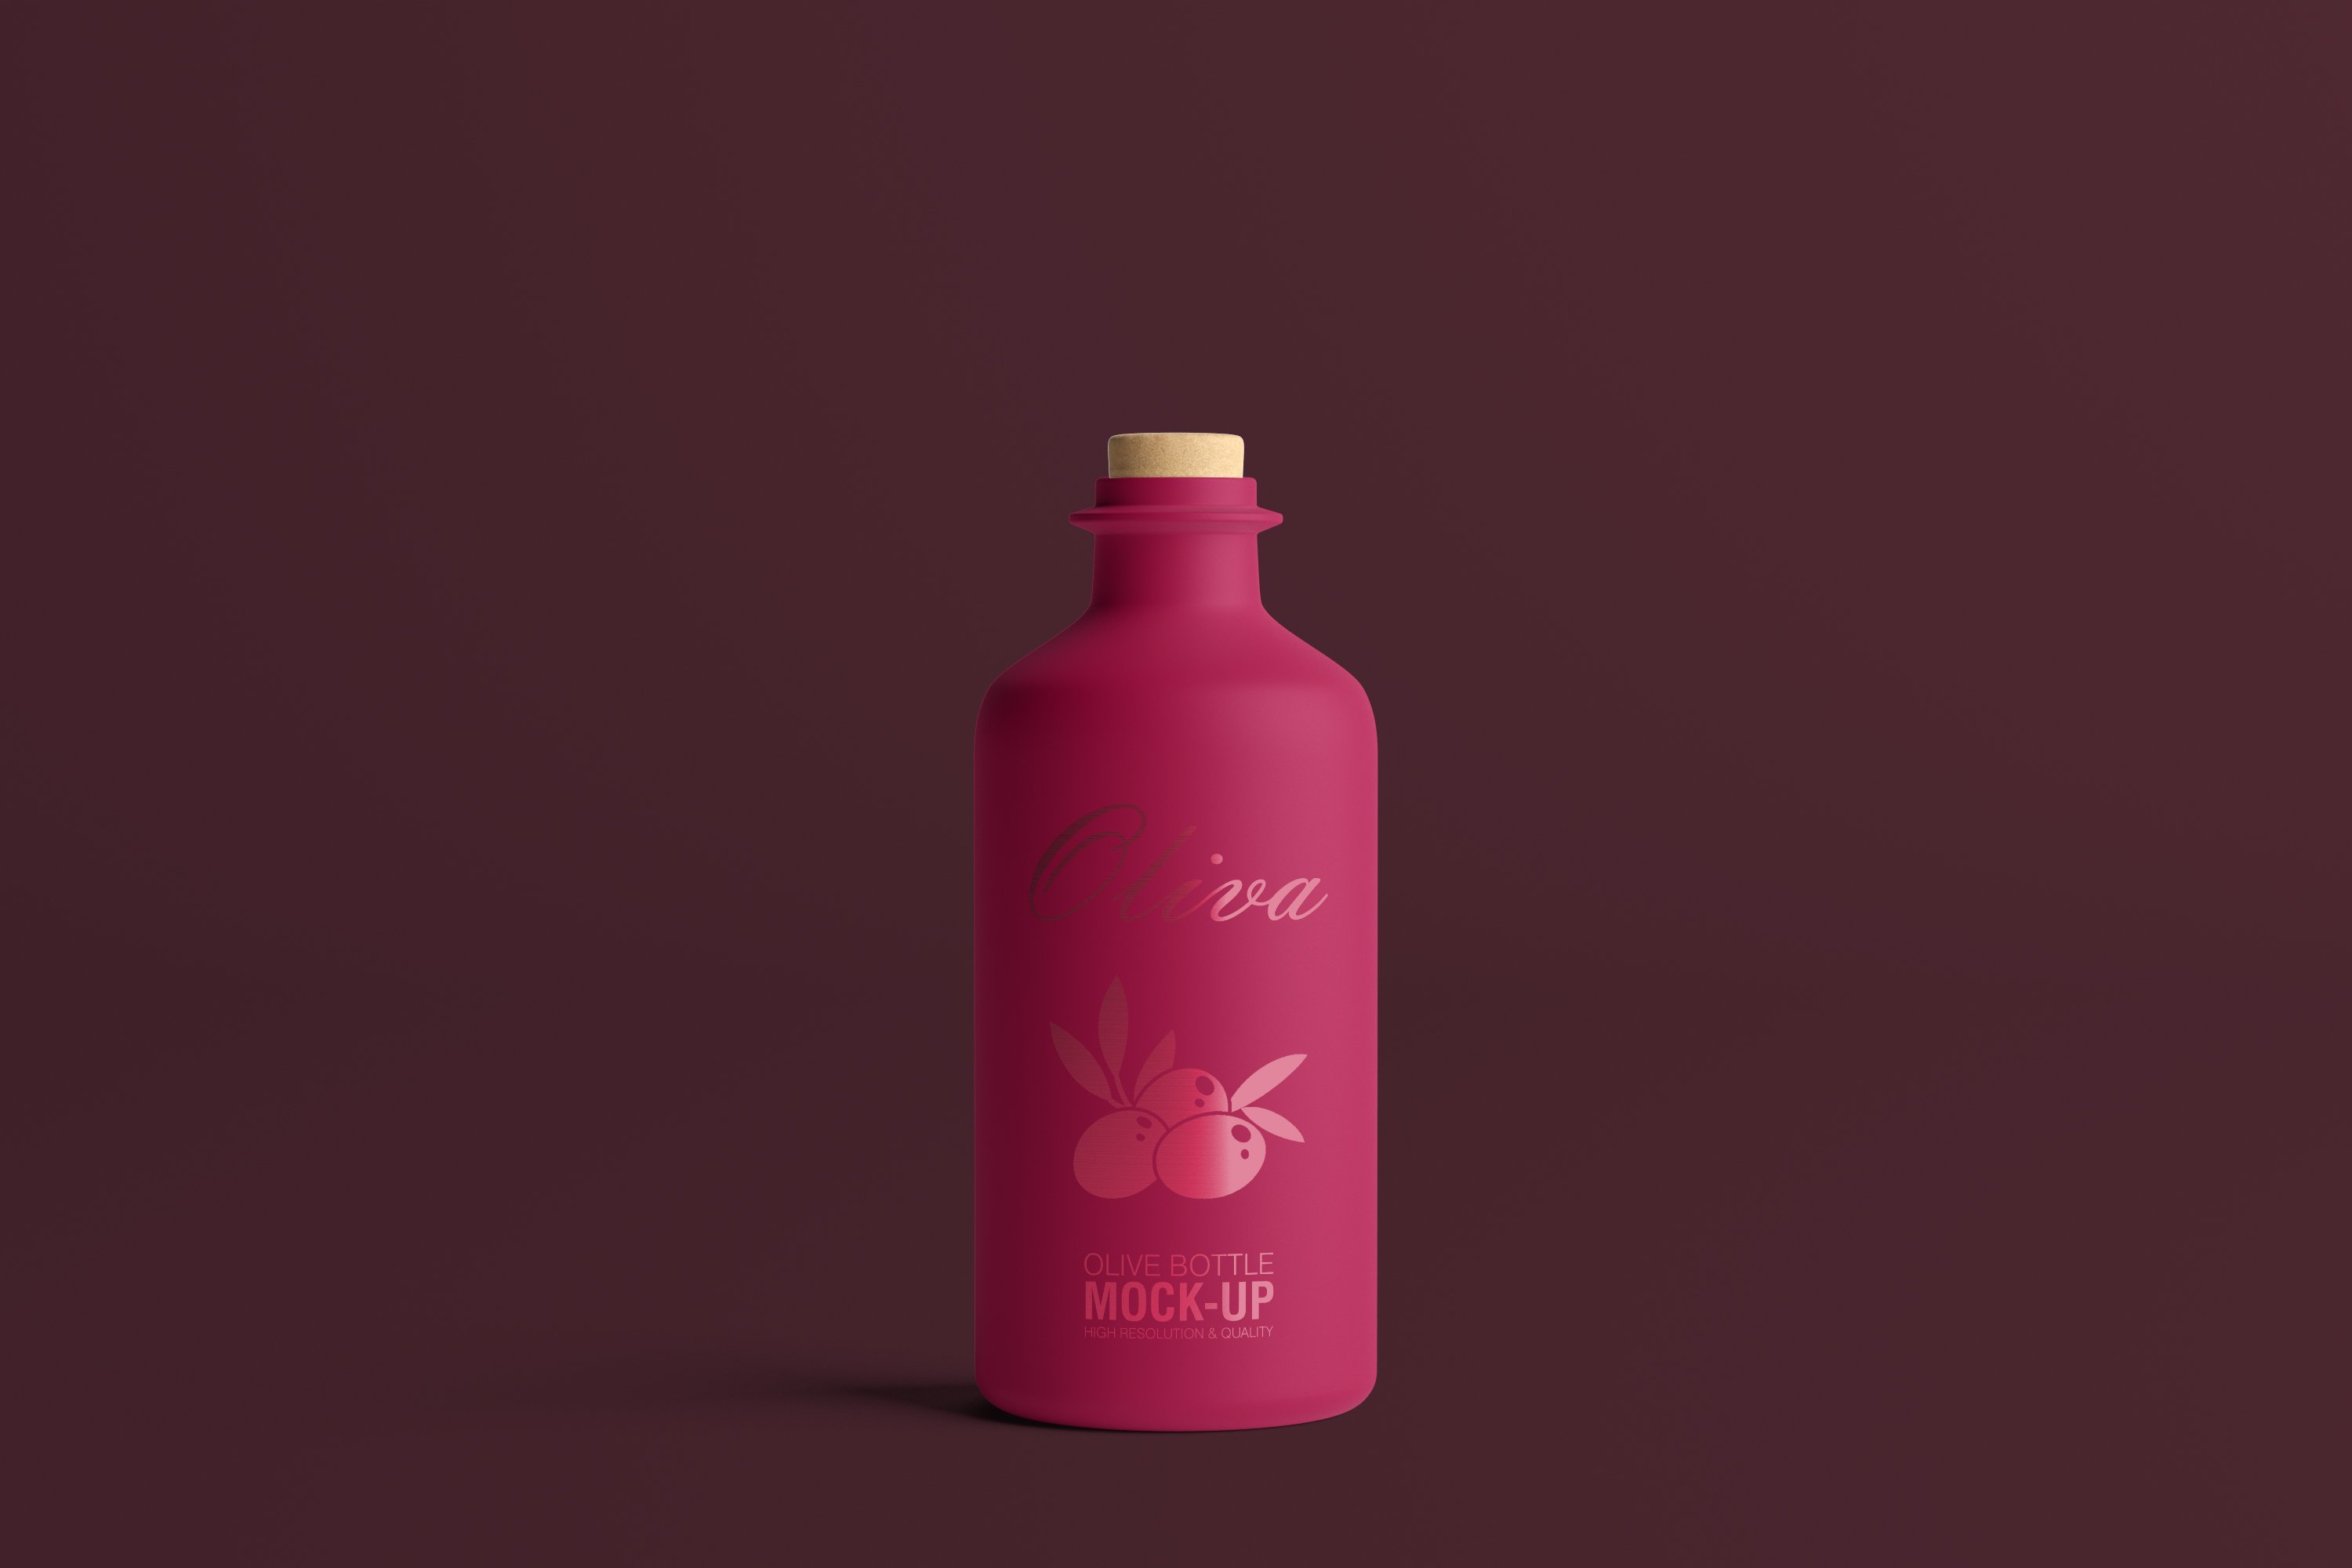 Bright red bottle with glance olive oil logo.